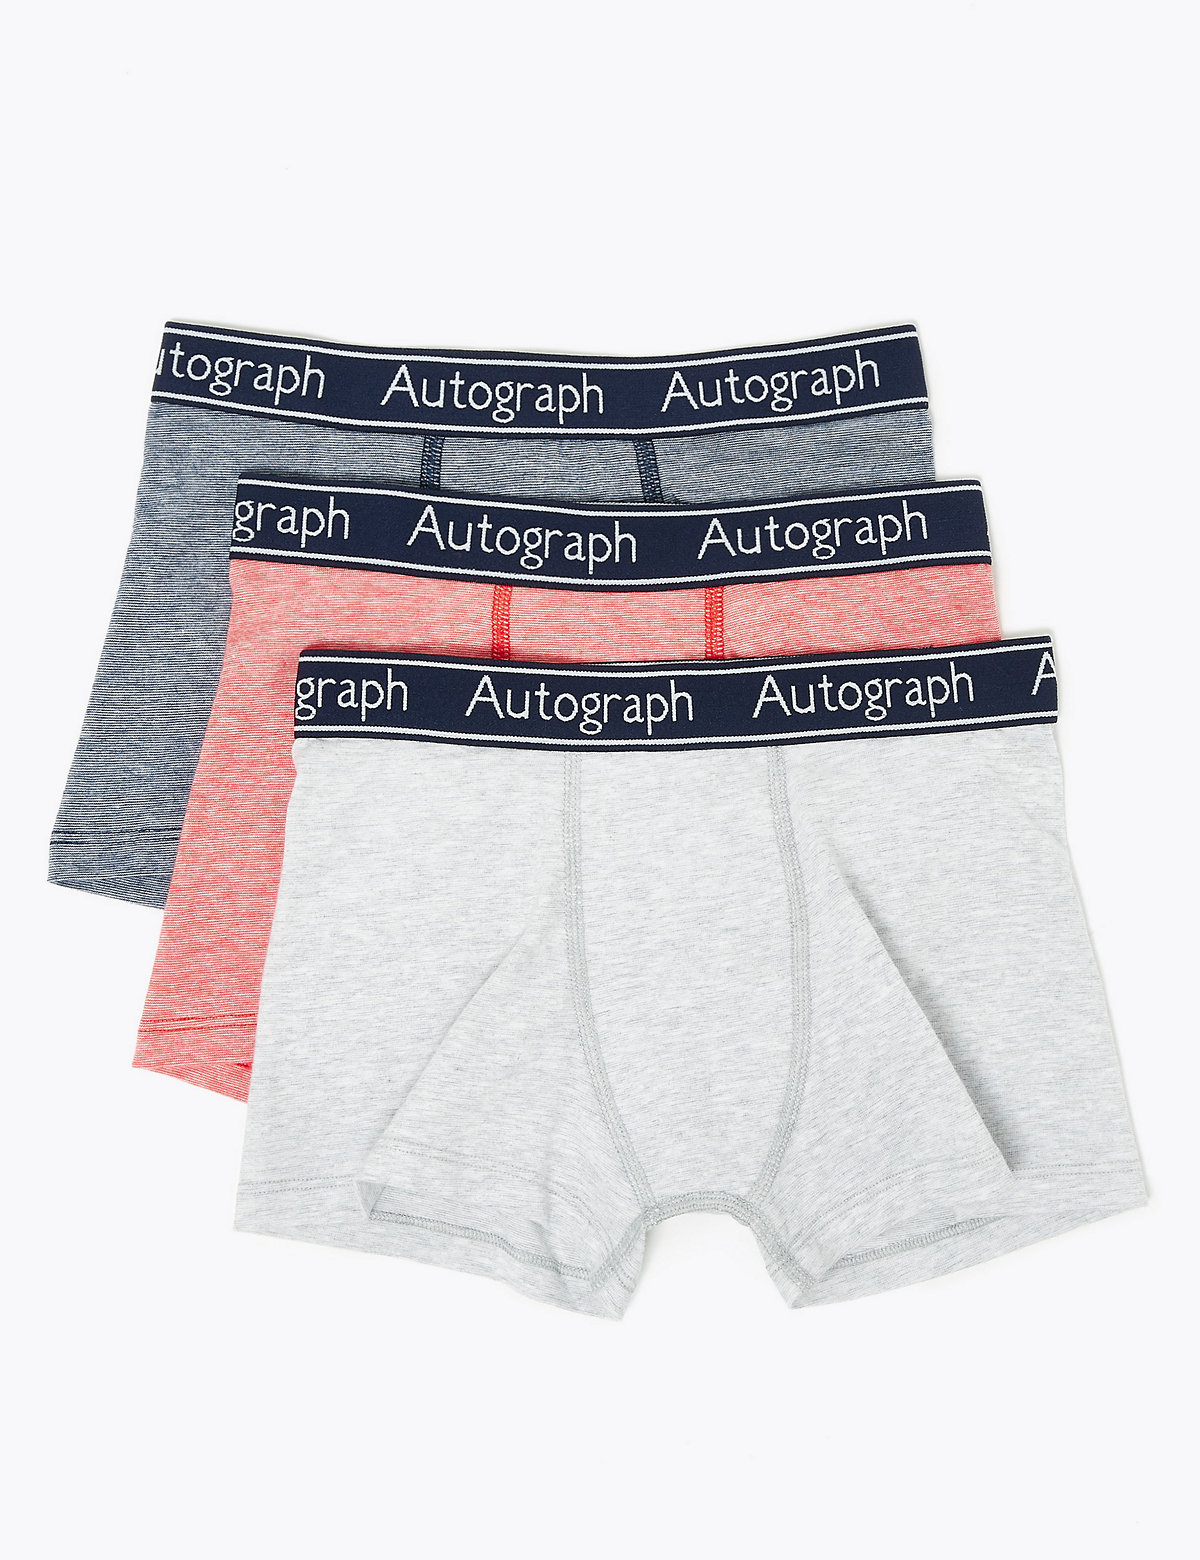 3 Pack Cotton with Lycra® Trunks